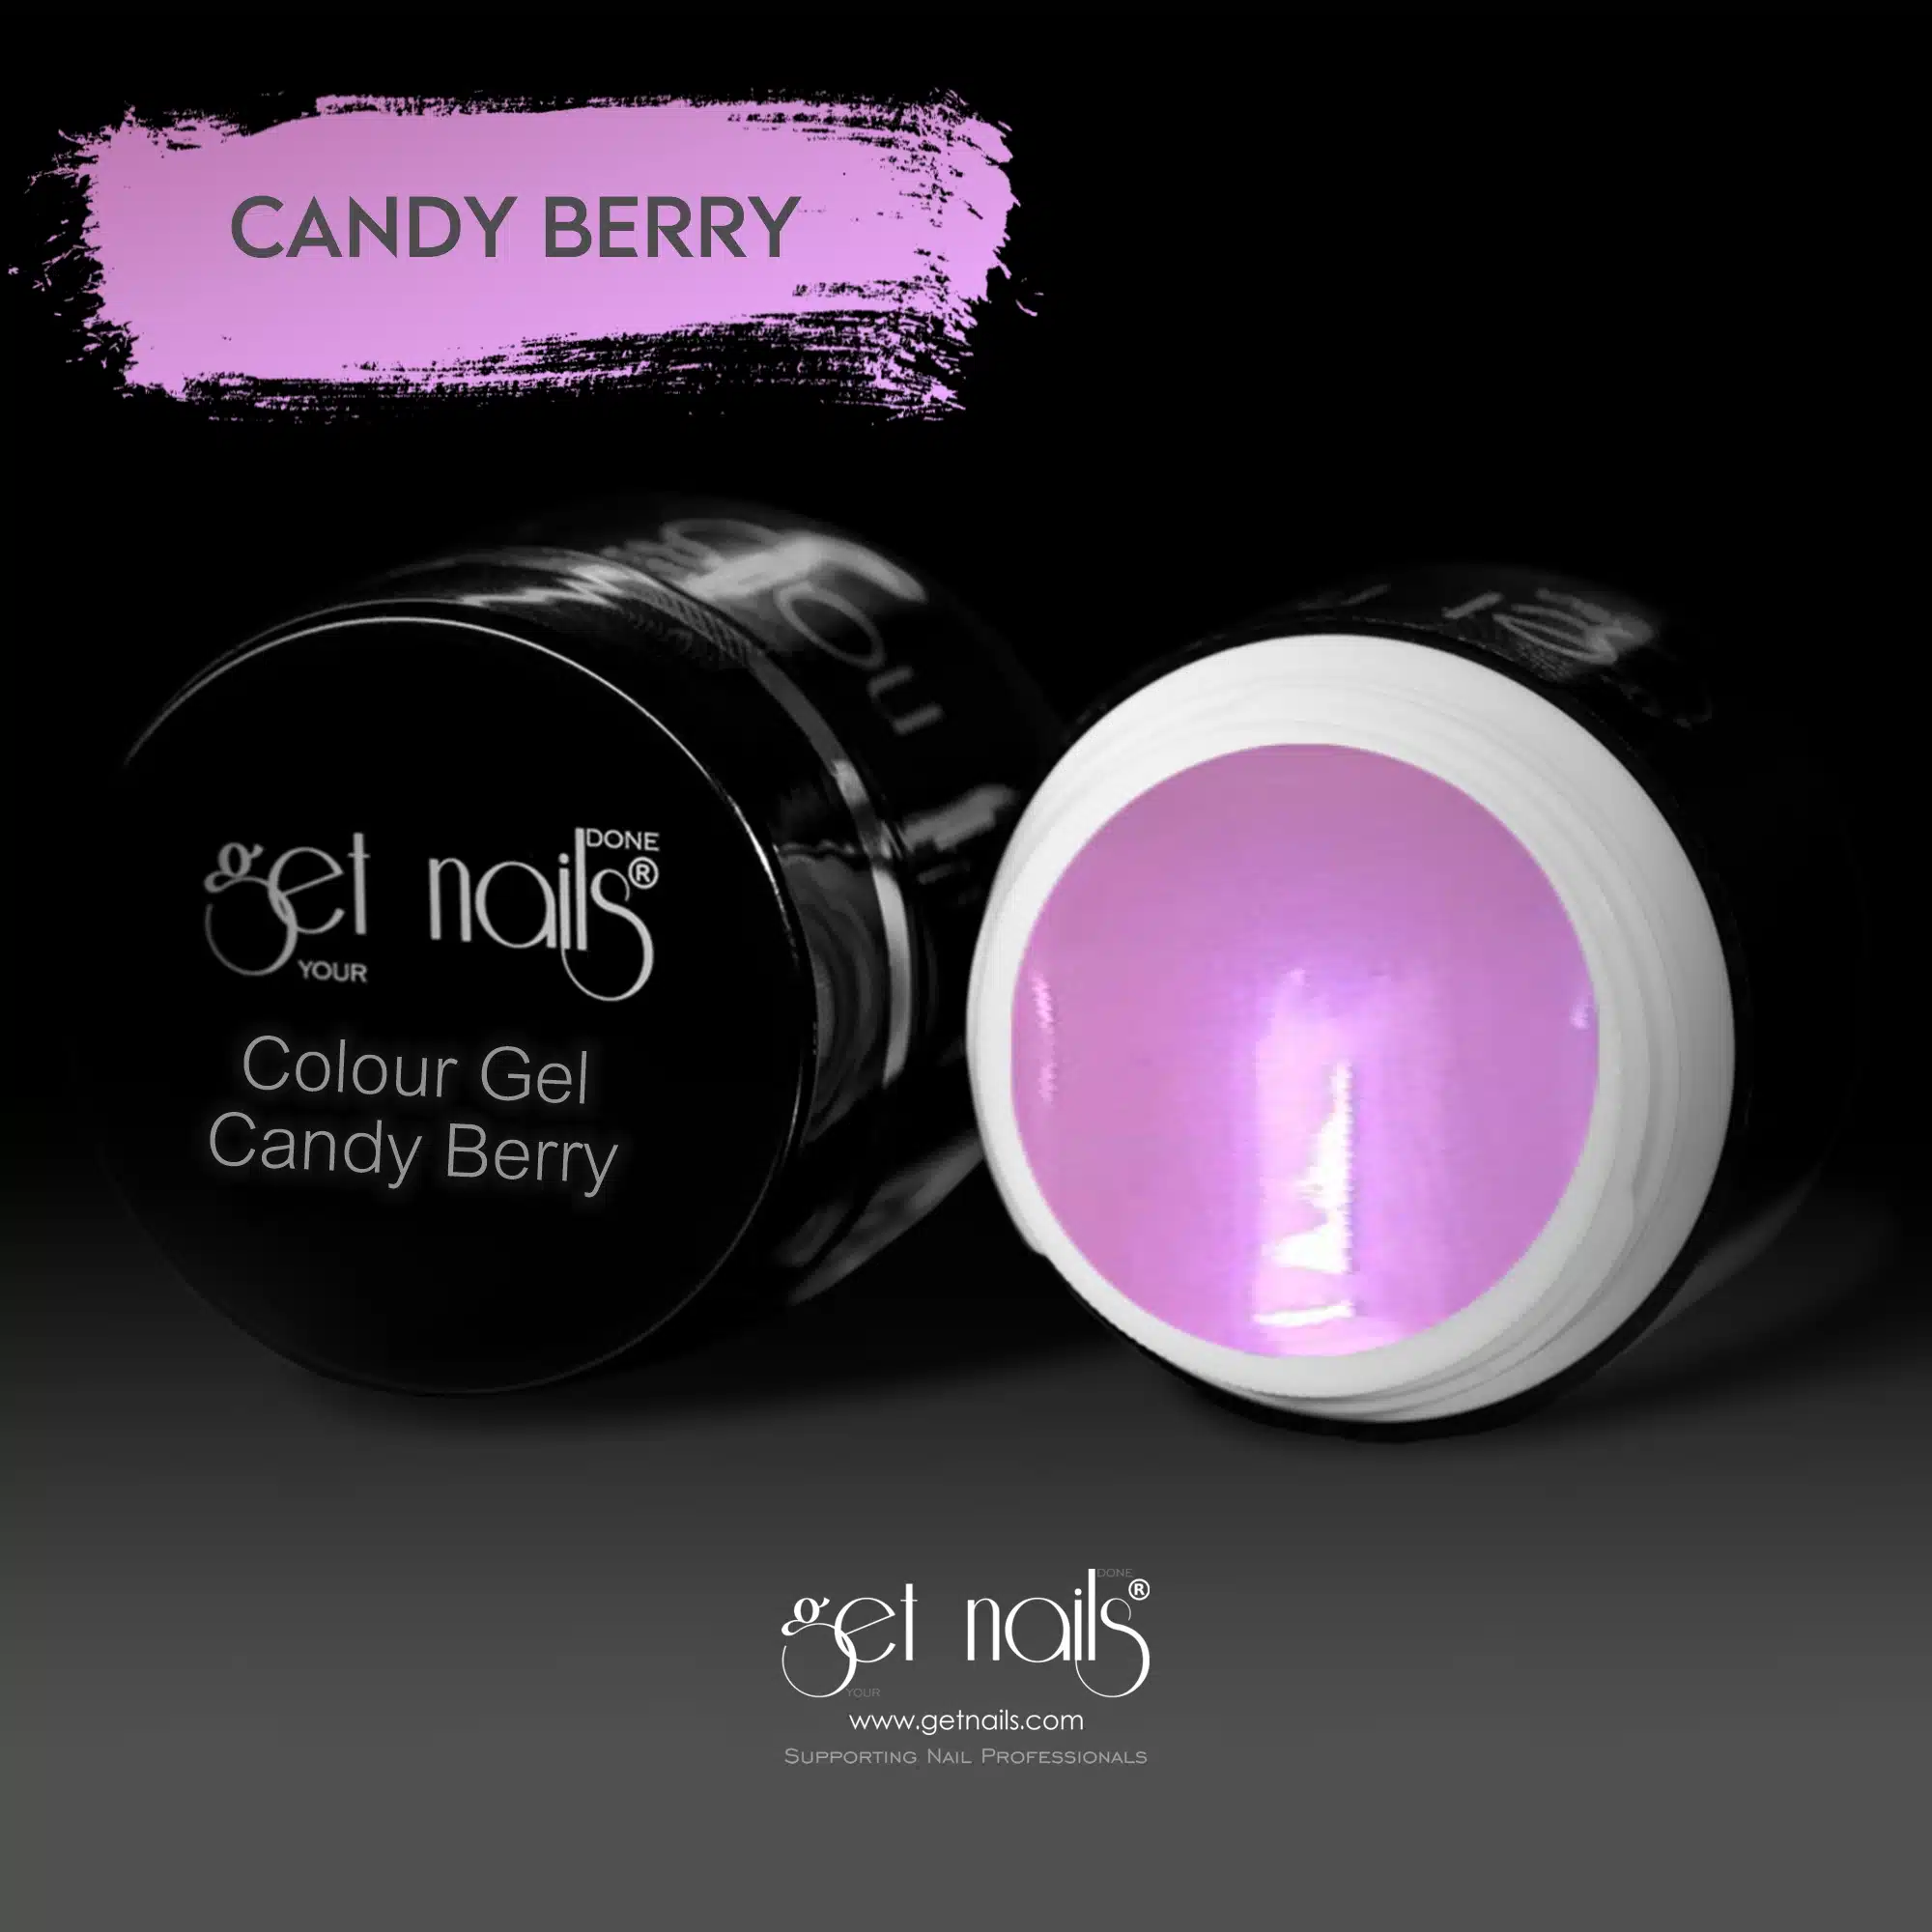 Get Nails Austria - Gel colorato Candy Berry 5g